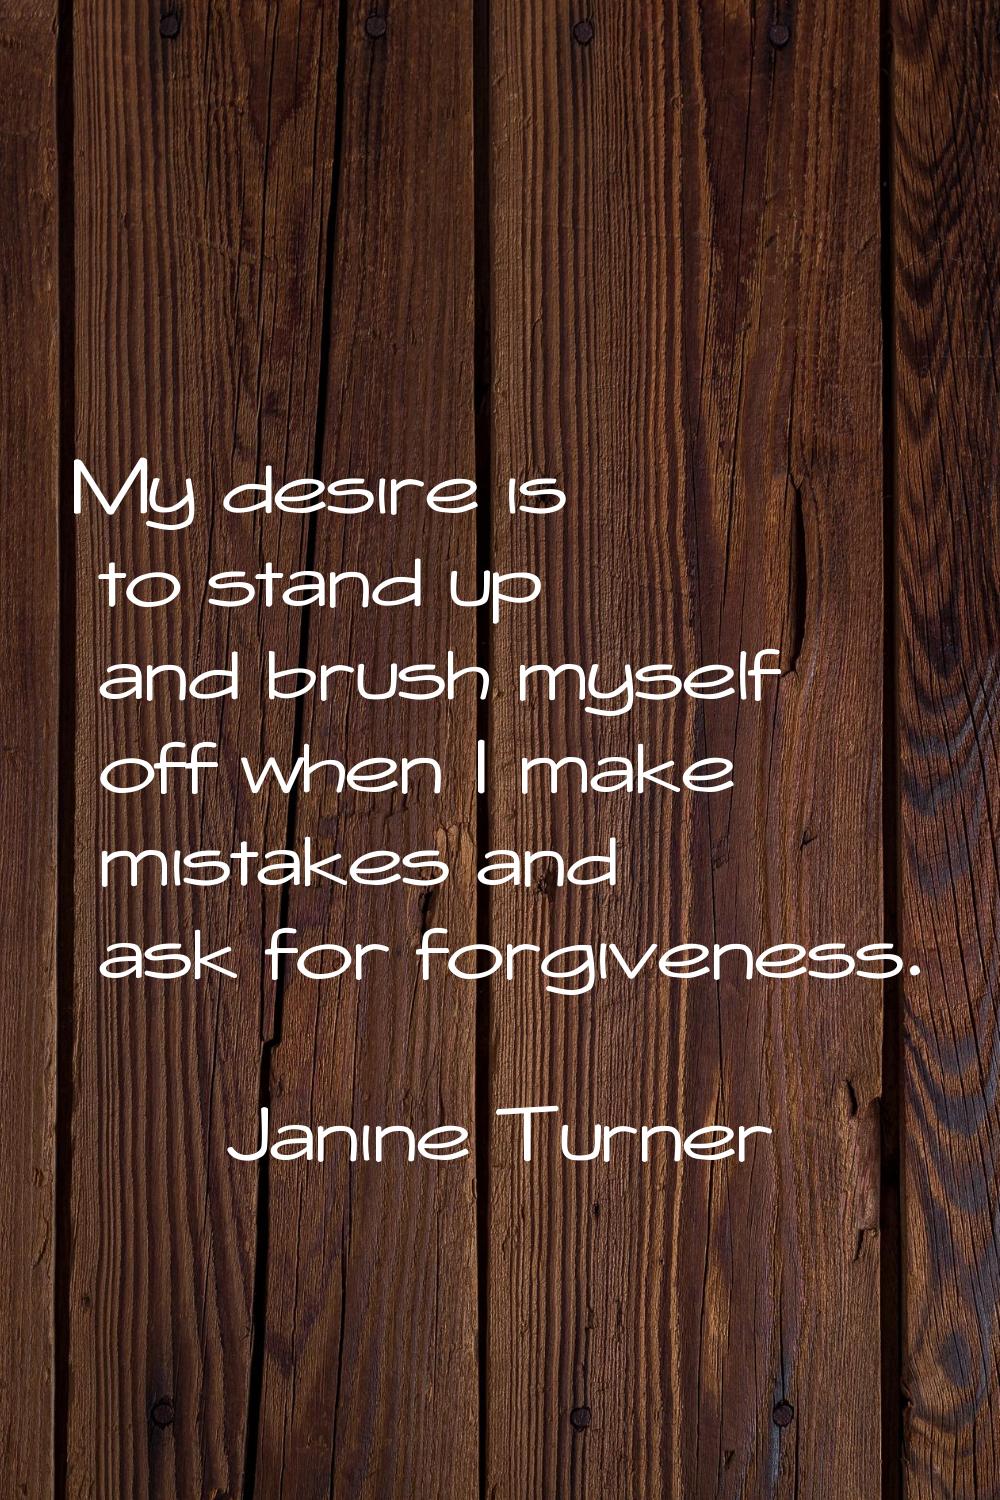 My desire is to stand up and brush myself off when I make mistakes and ask for forgiveness.